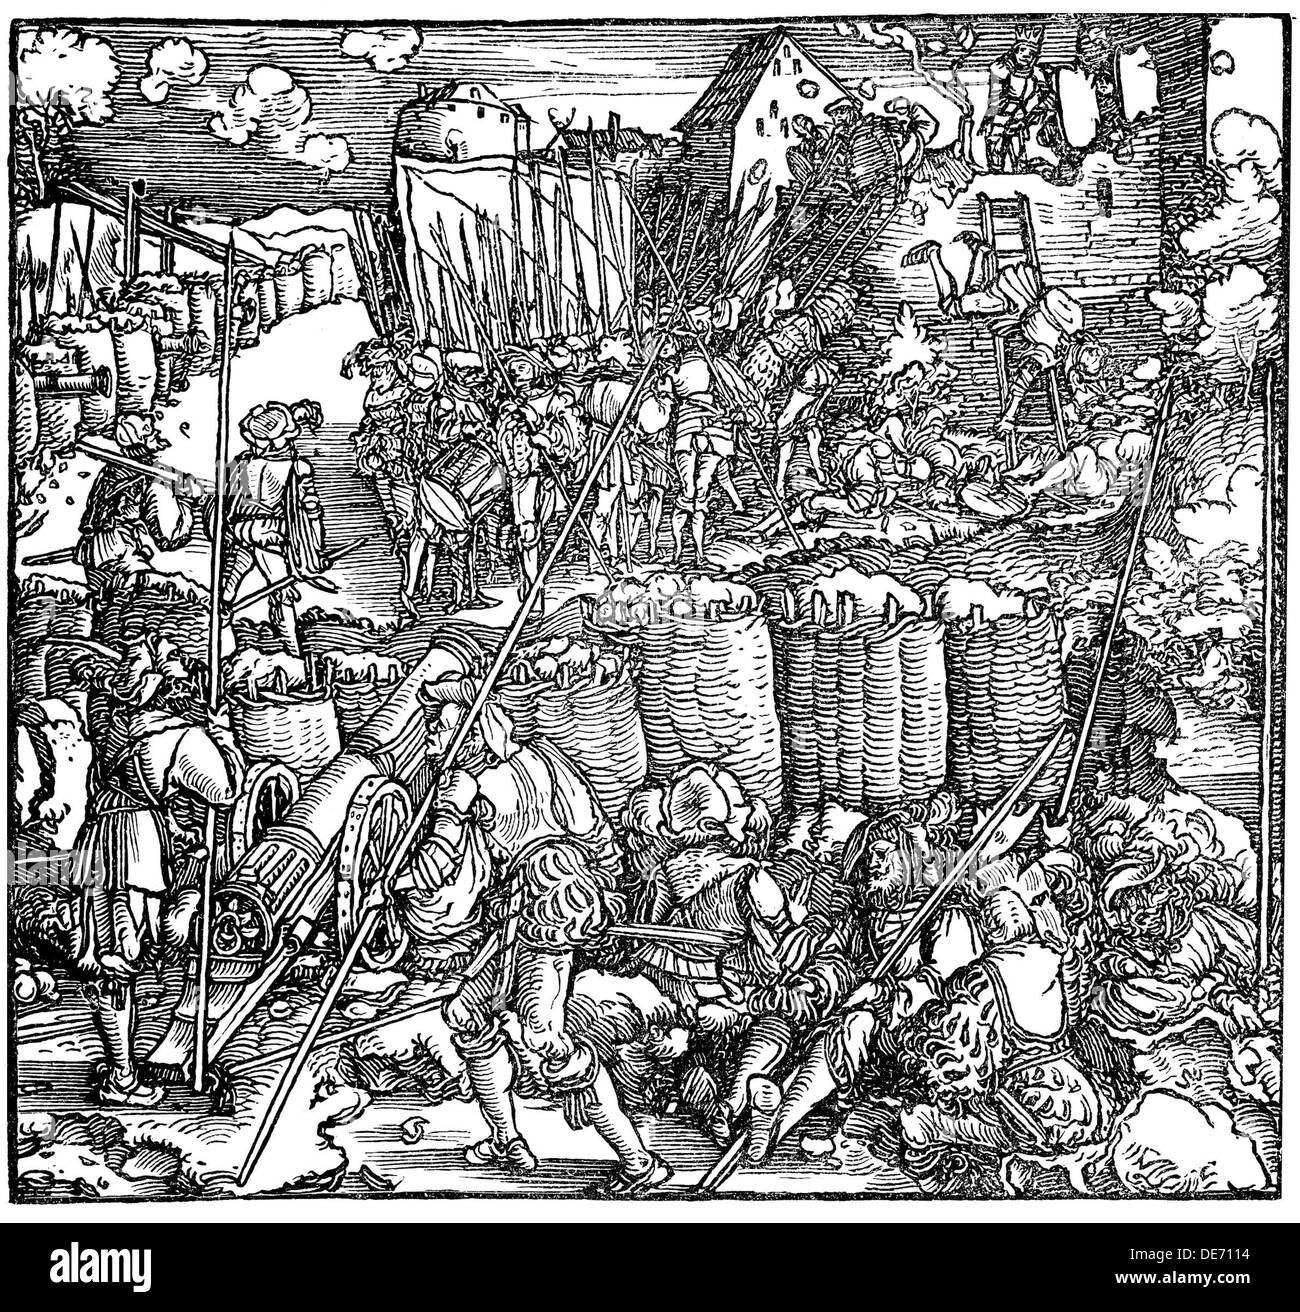 Siege of a fortress. Illustration from the book Phisicke Against Fortune by Petrarch, 1532. Artist: Weiditz, Hans, the Younger (c. 1500-1536) Stock Photo